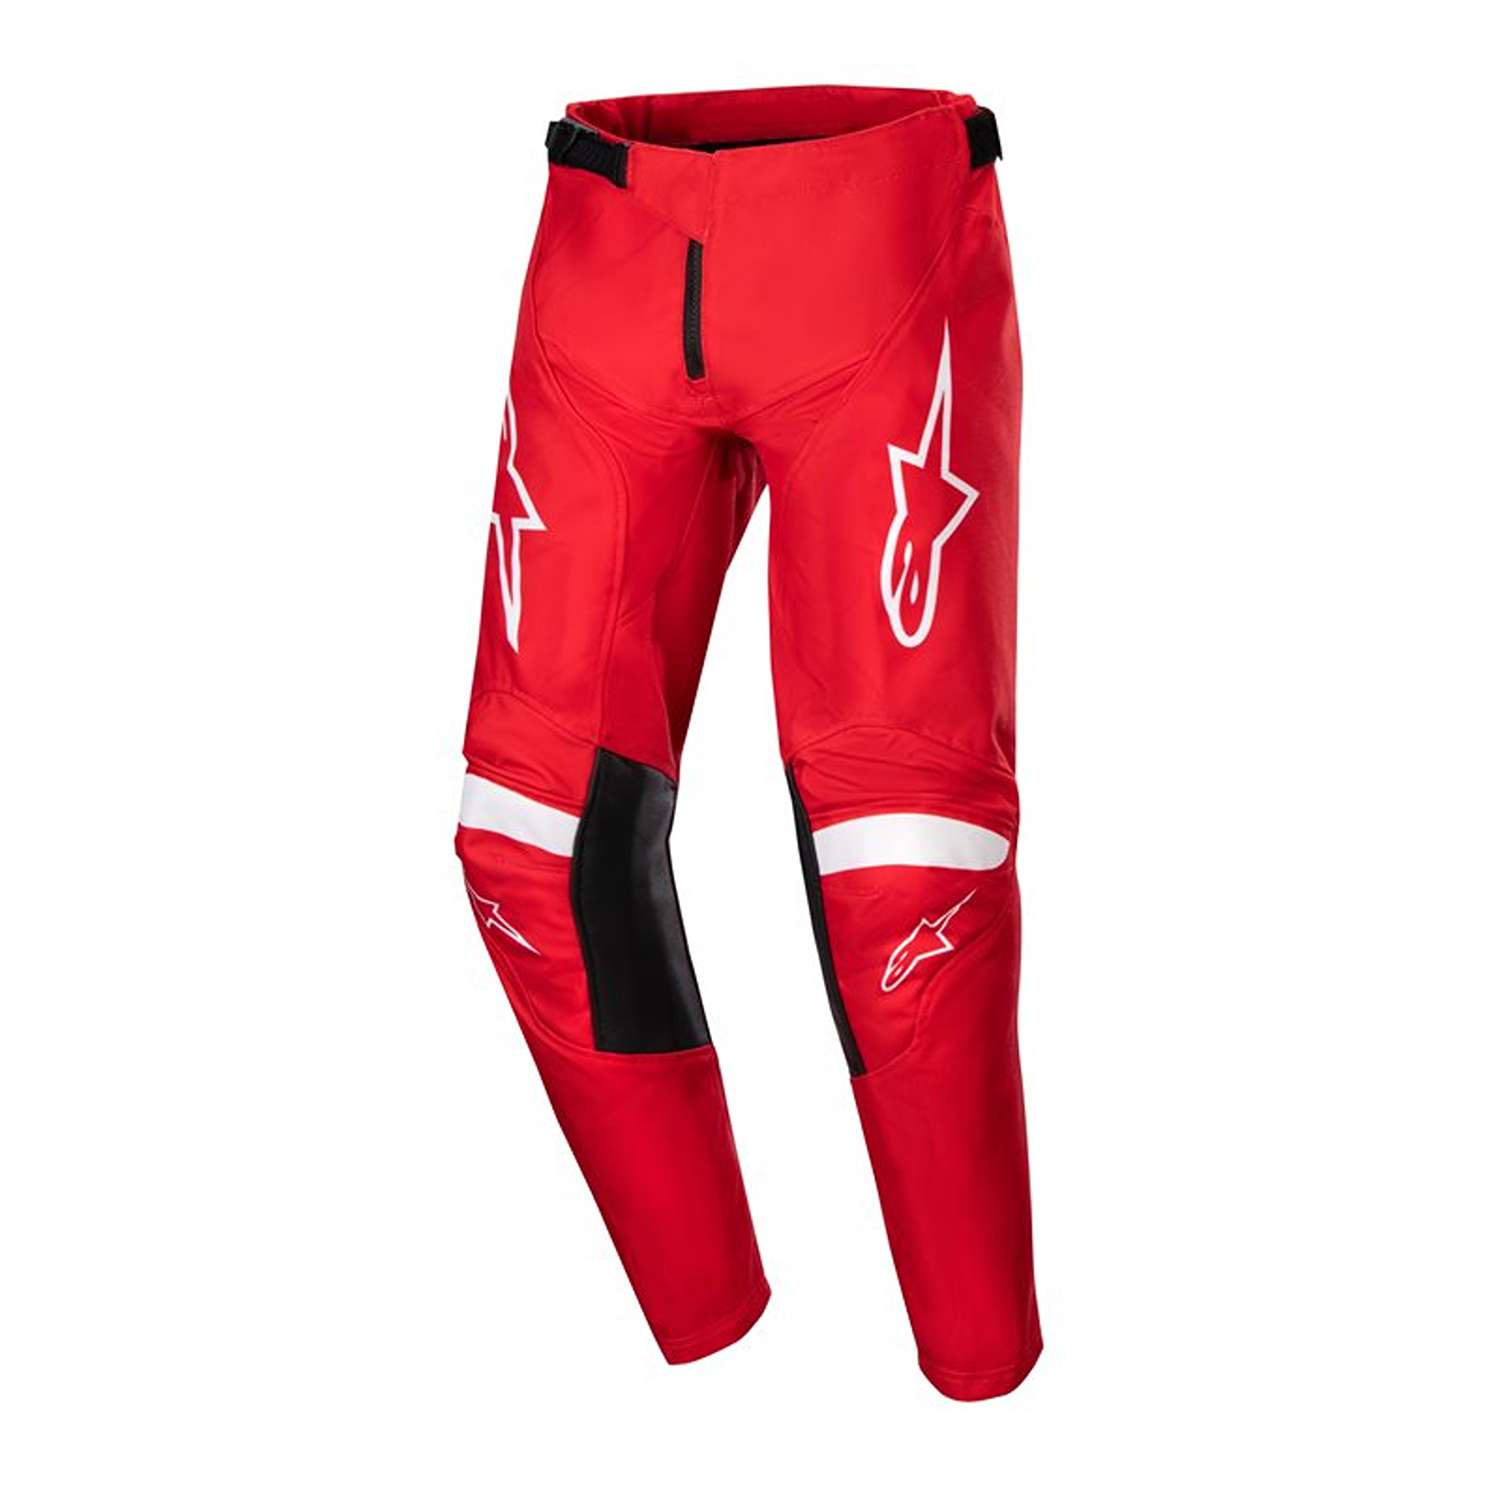 Image of EU Alpinestars Youth Racer Lurv Pants Mars Red White Taille 24